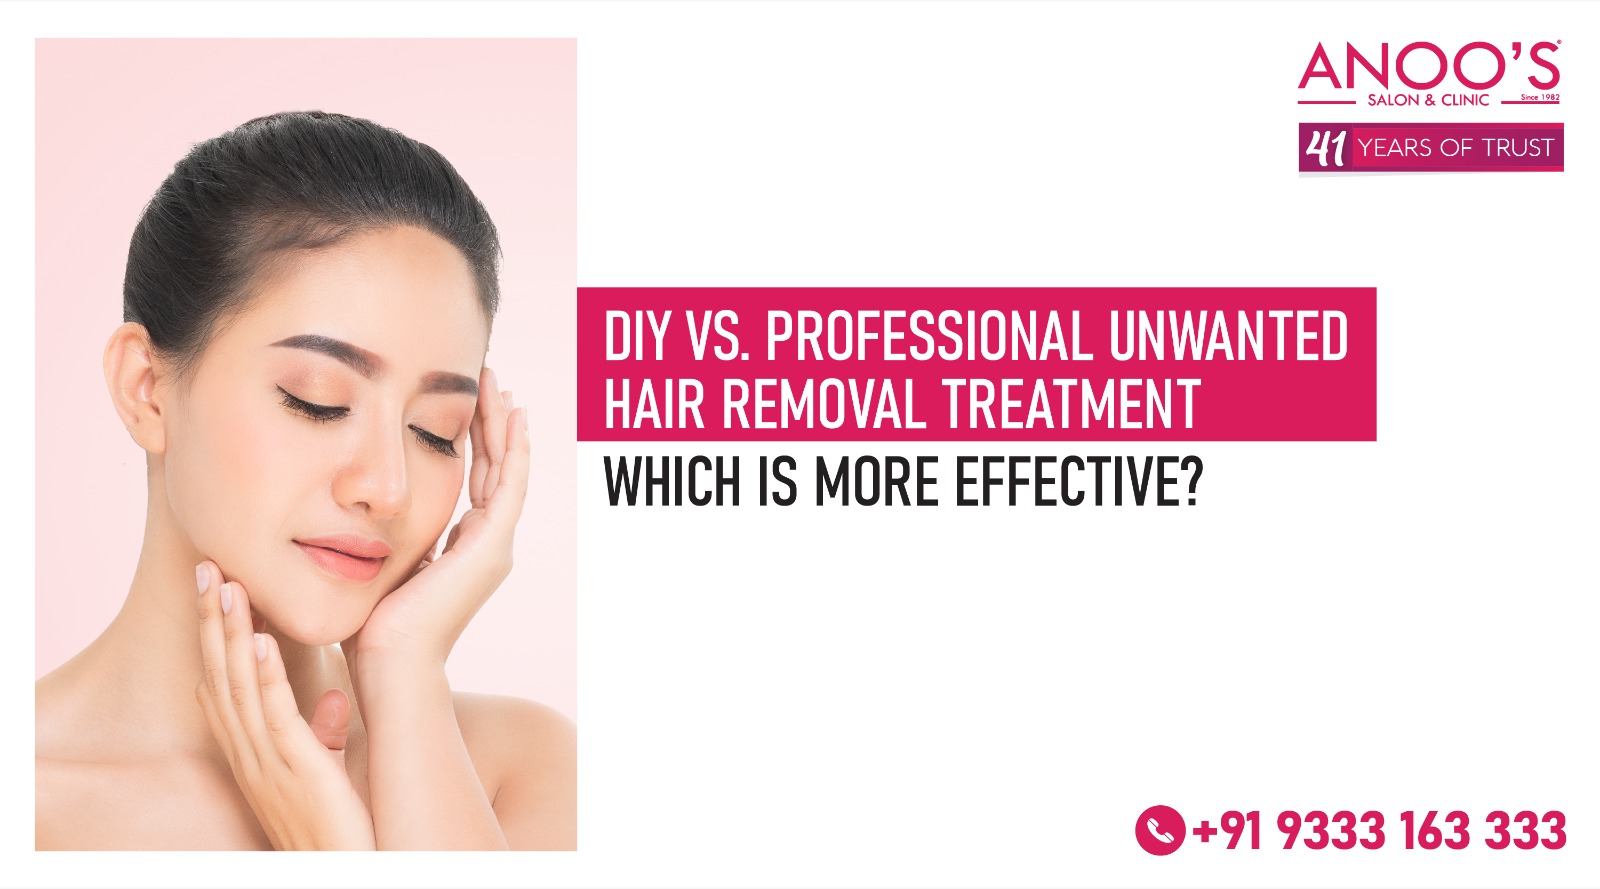 DIY vs. Professional Unwanted Hair Removal Treatment: Which is More Effective?